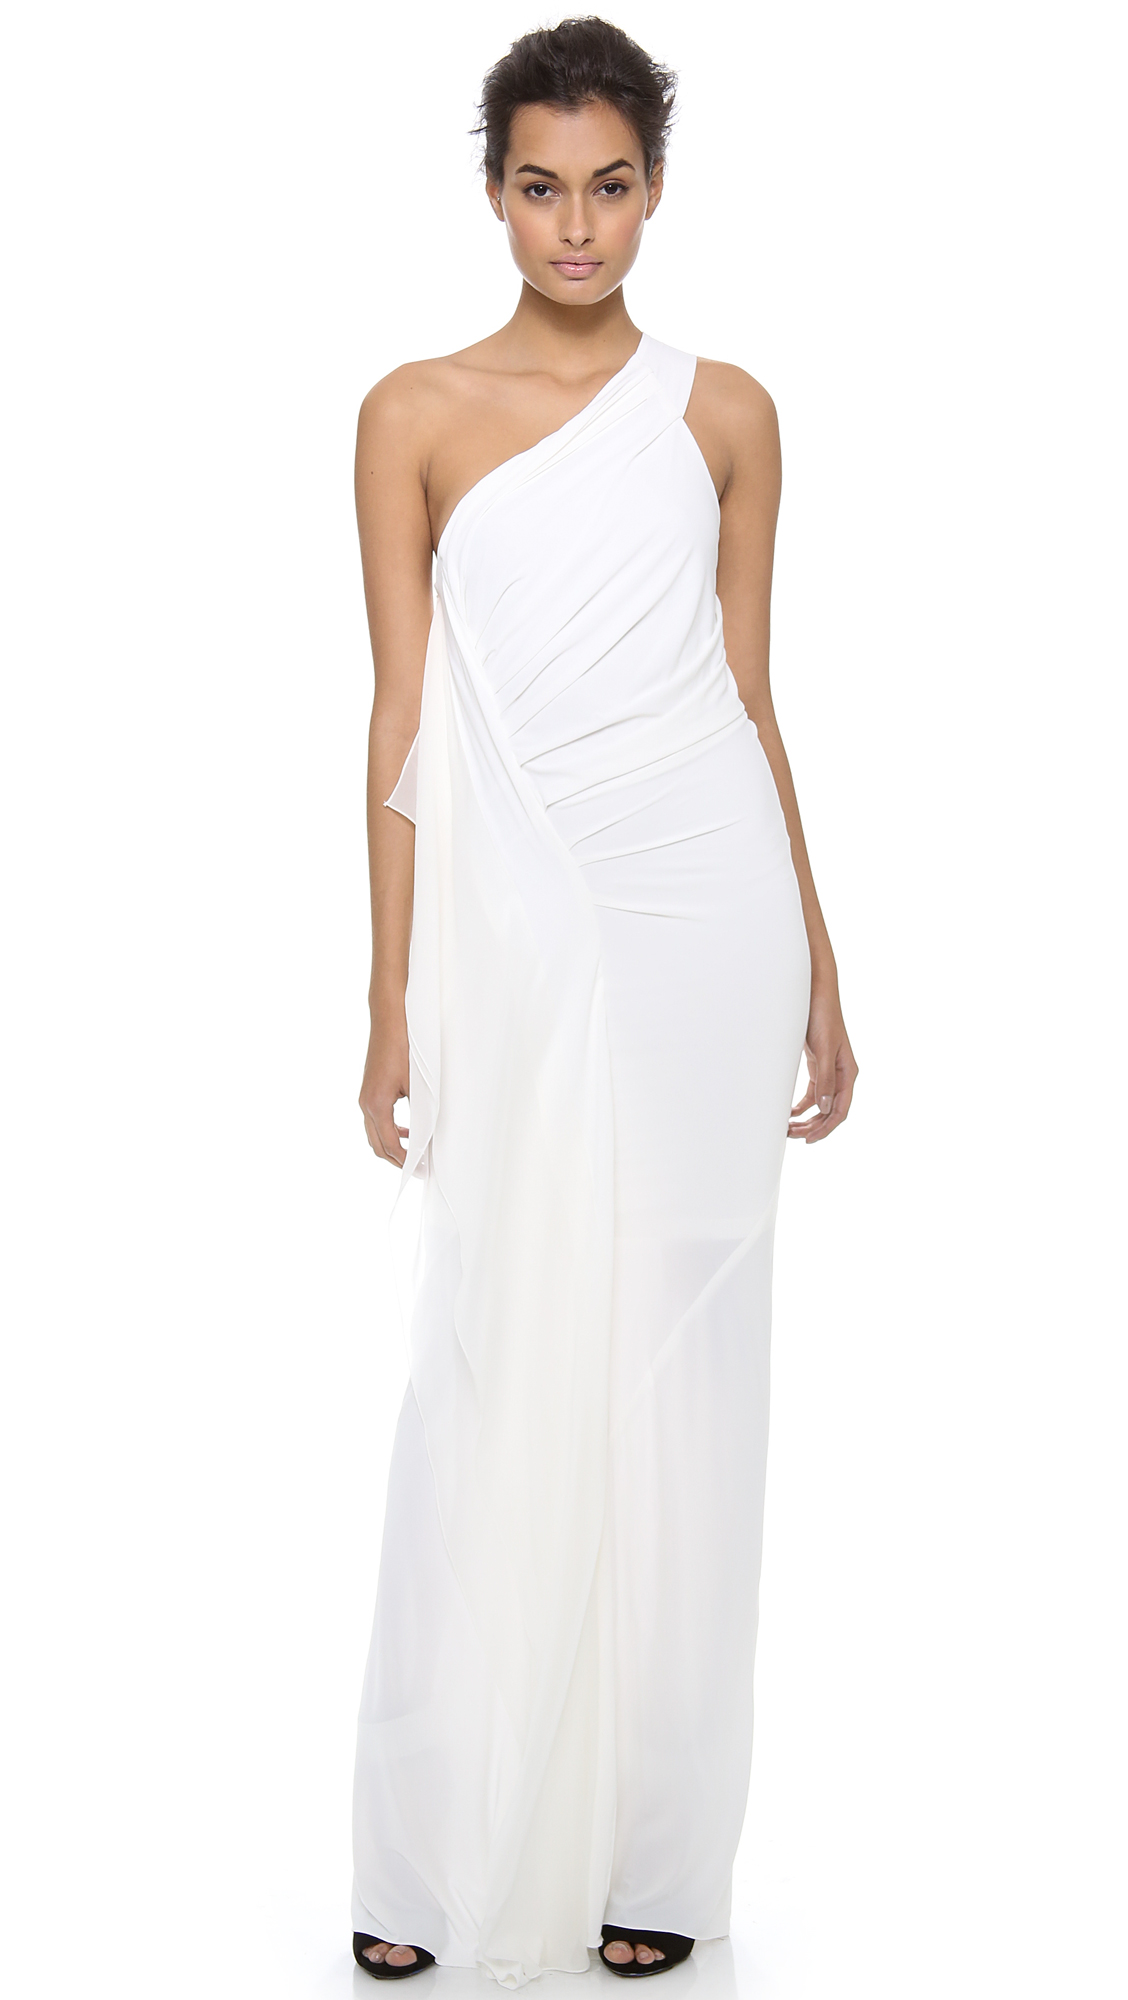 Donna Karan One Shoulder Draped Evening Gown in Ivory (White) - Lyst